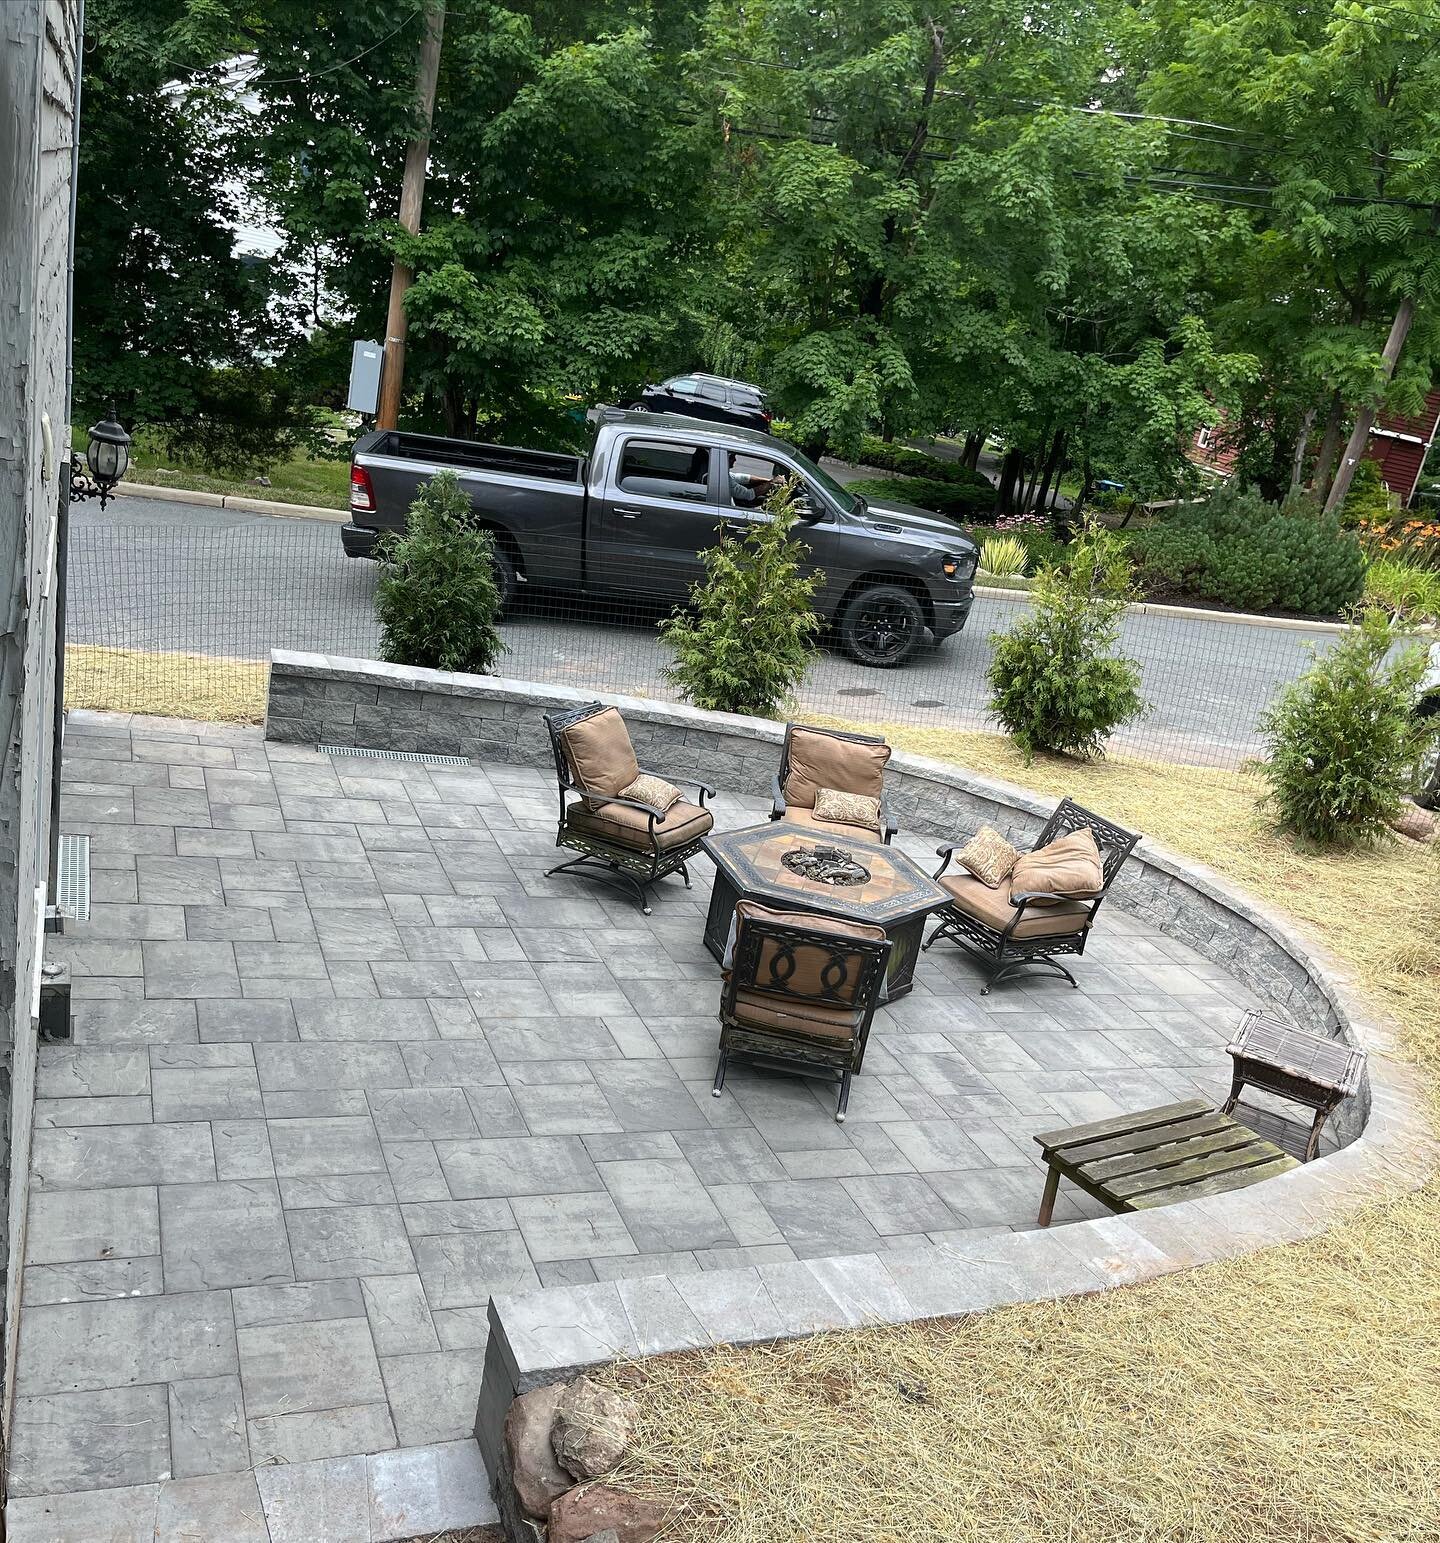 Another happy client!! Great new area for entertaining AND relaxing! #hardscape #patiopros #wearentgivenourreputation #weearnit💪💪